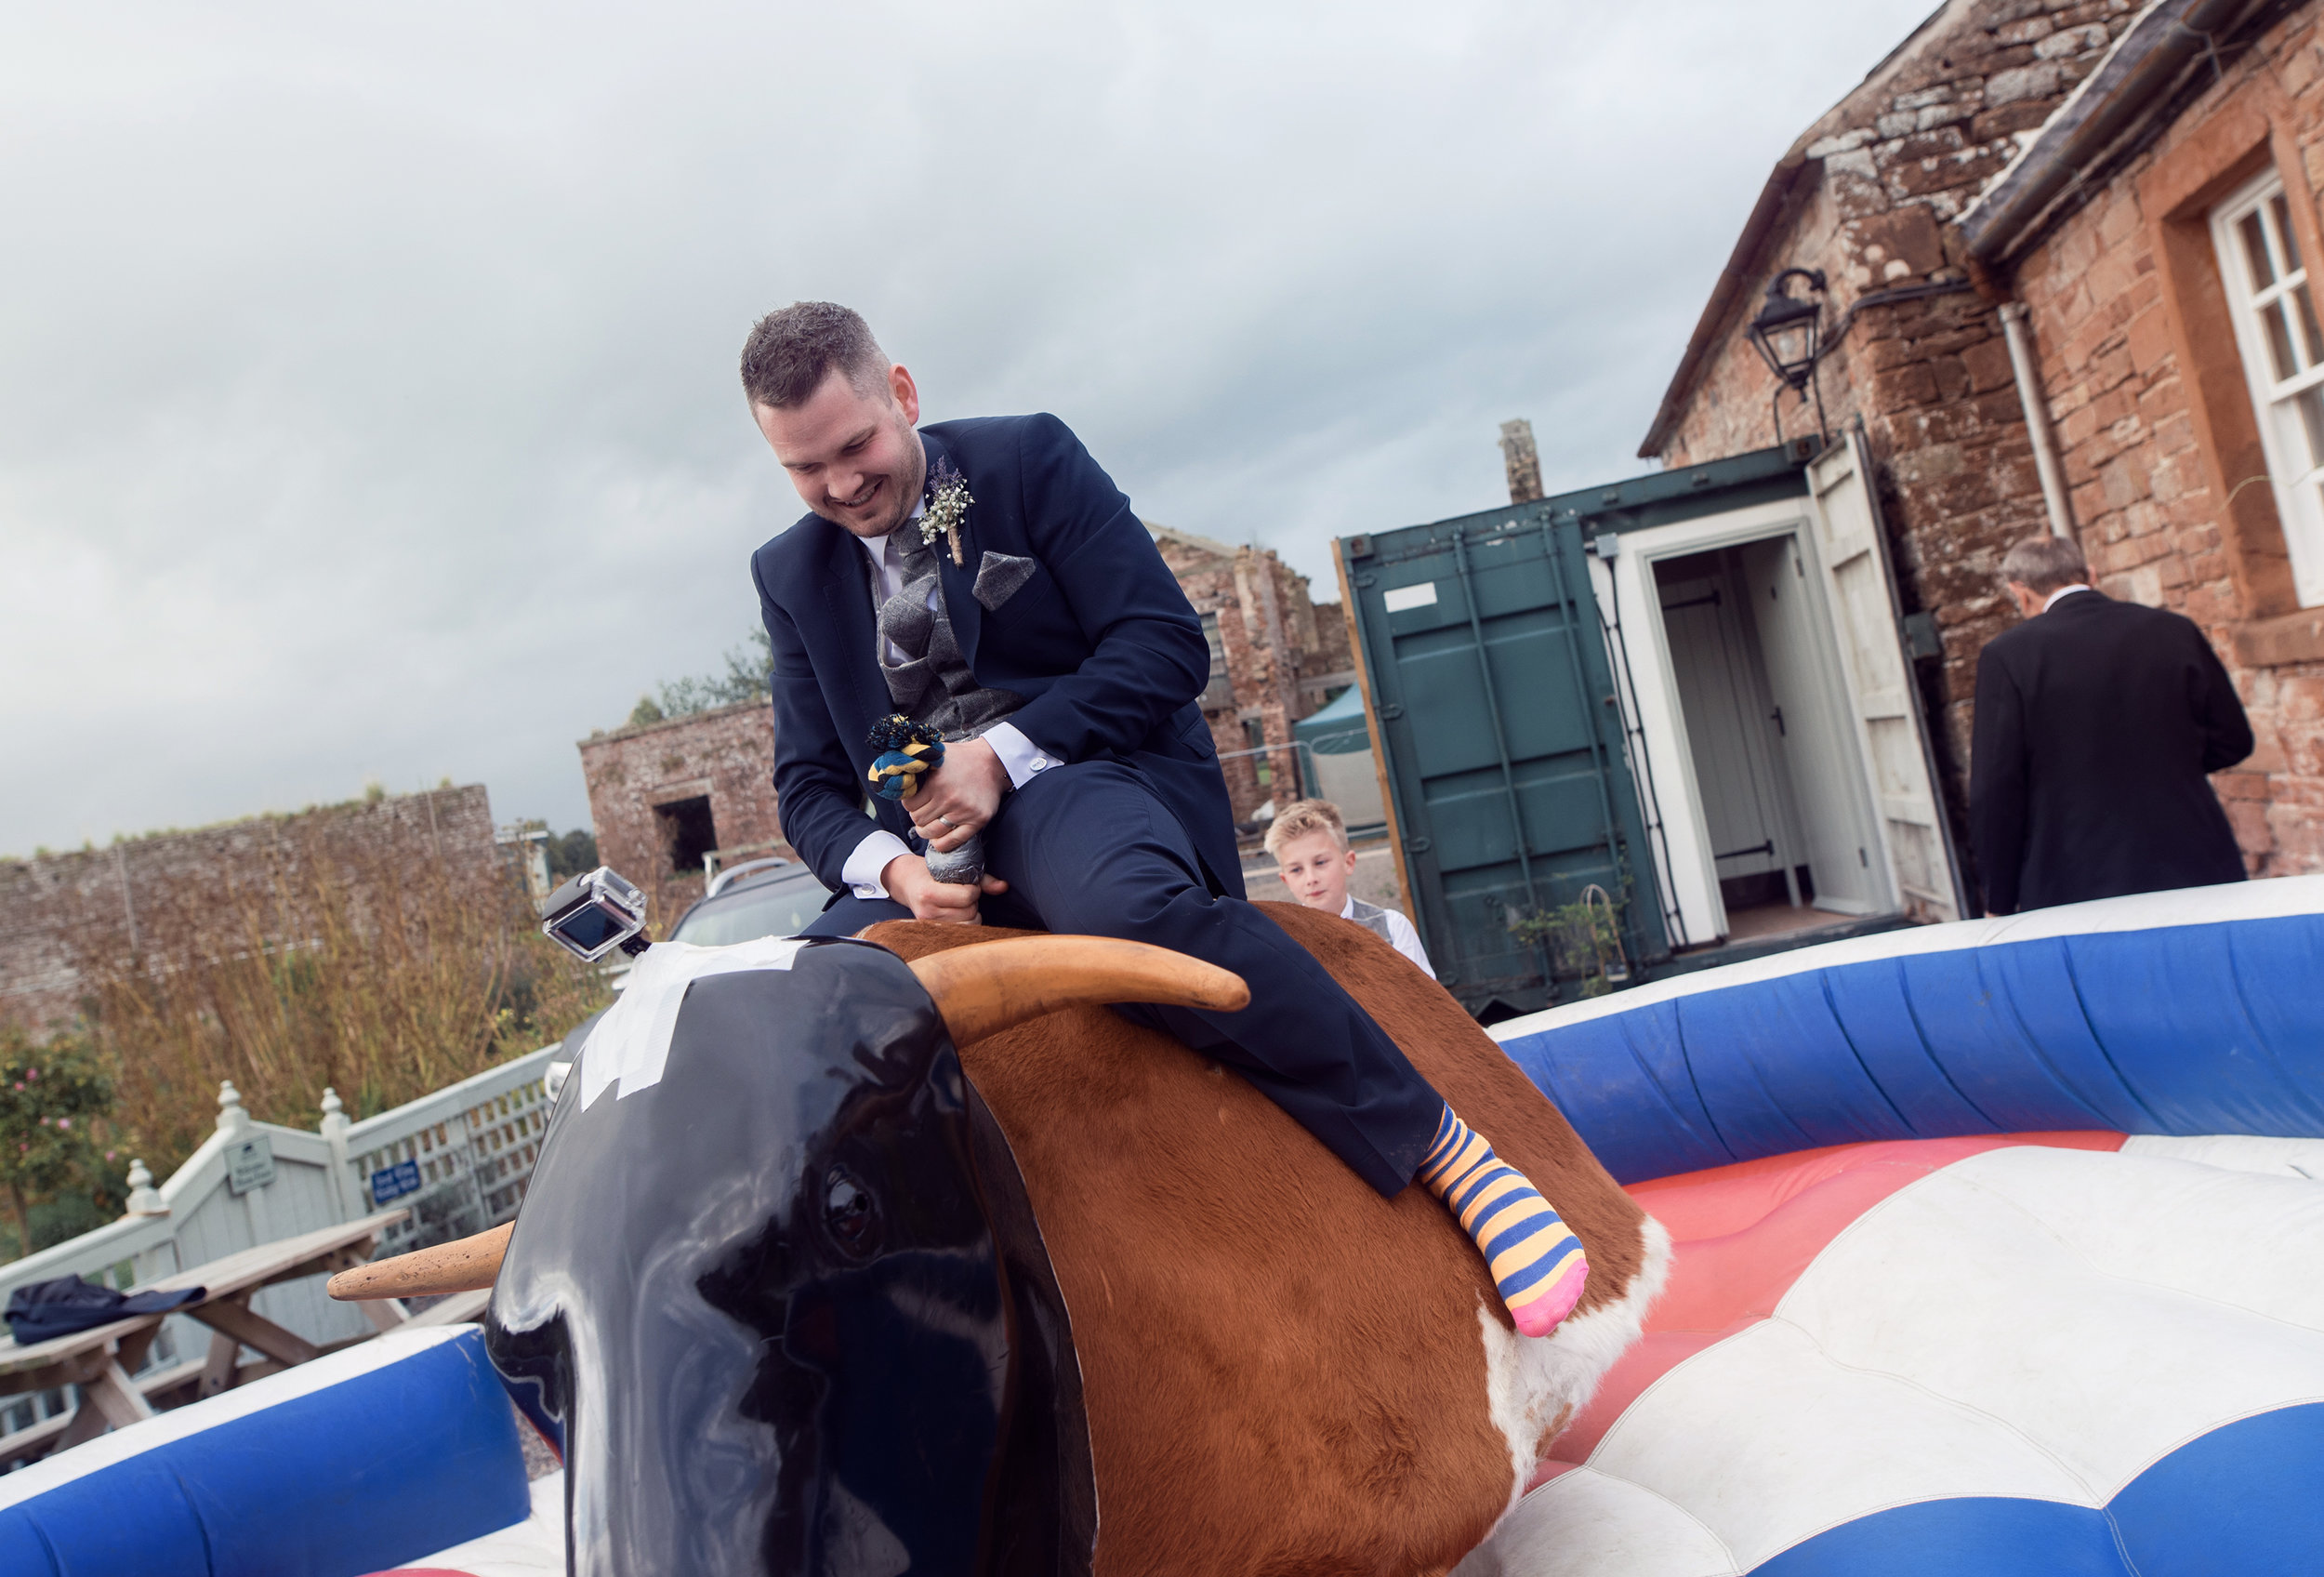 The groom doing his best to stay on the rodeo bull ride he did not last very long at all